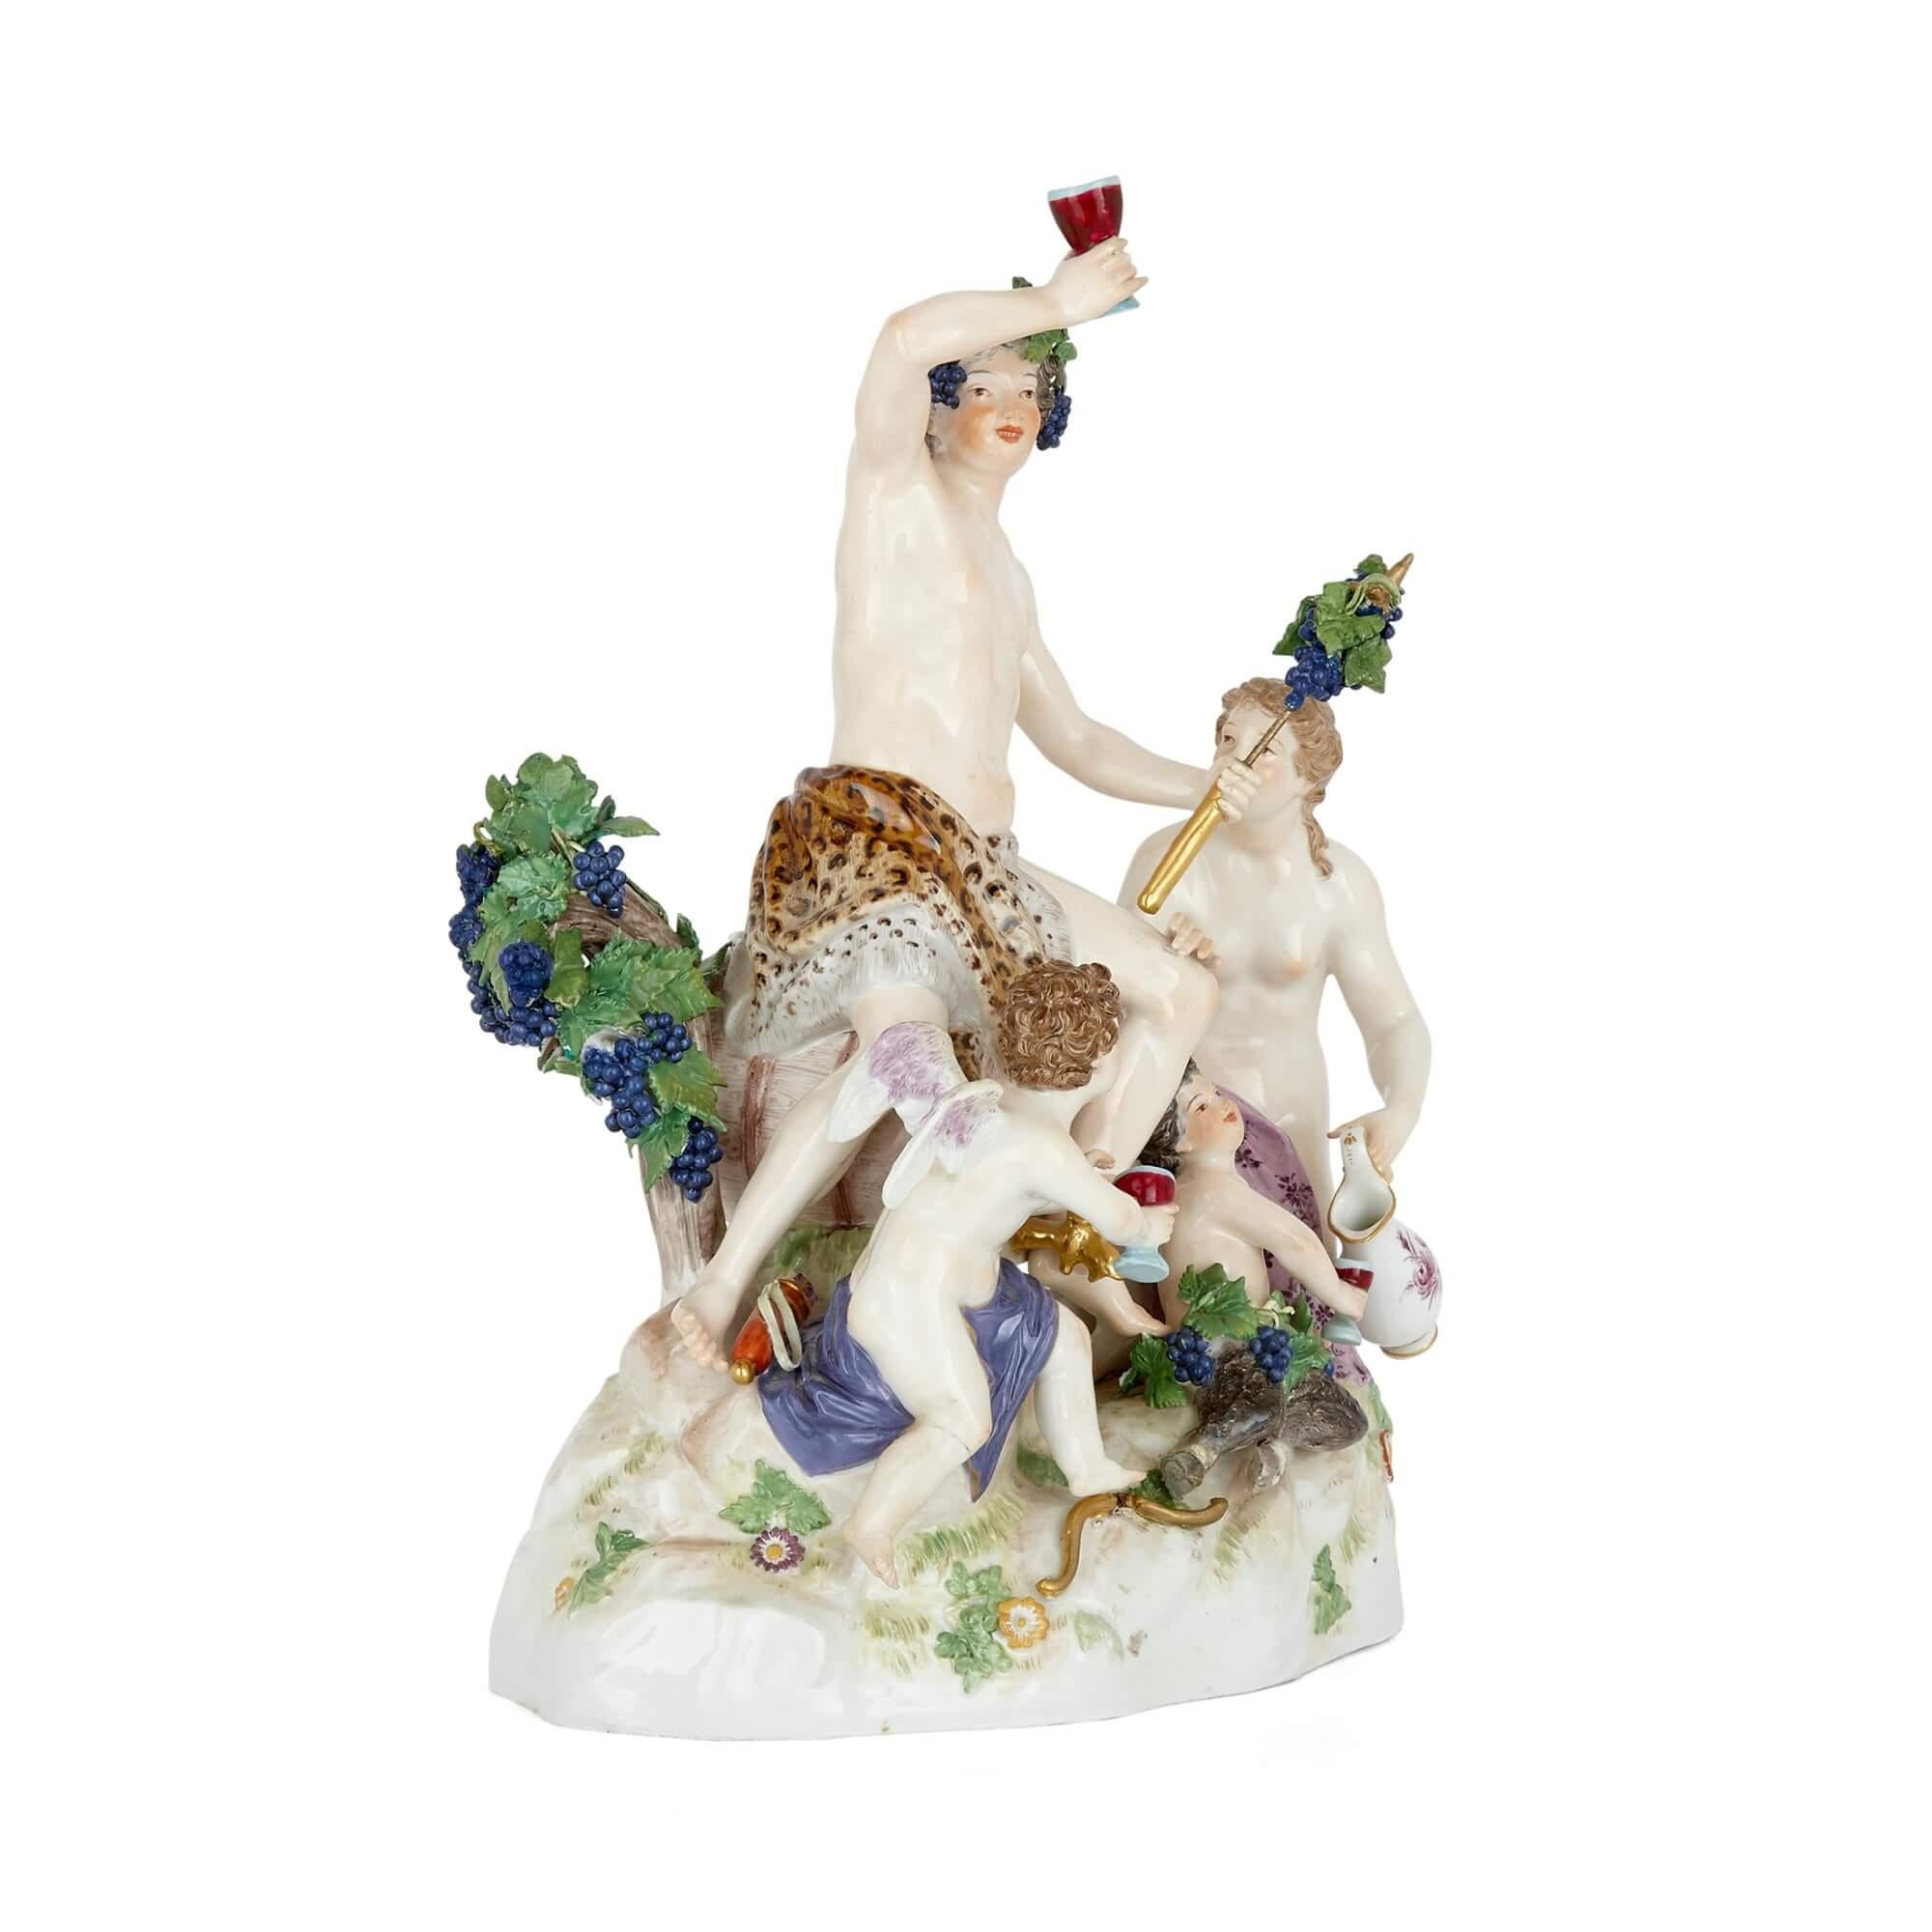 This piece is a superb example of the work of the Meissen porcelain manufactory. Modelled by E. A. Leuteritz in the 19th century based upon earlier models, it is a group piece, showing the God Bacchus attended by a small band of fellow revellers.